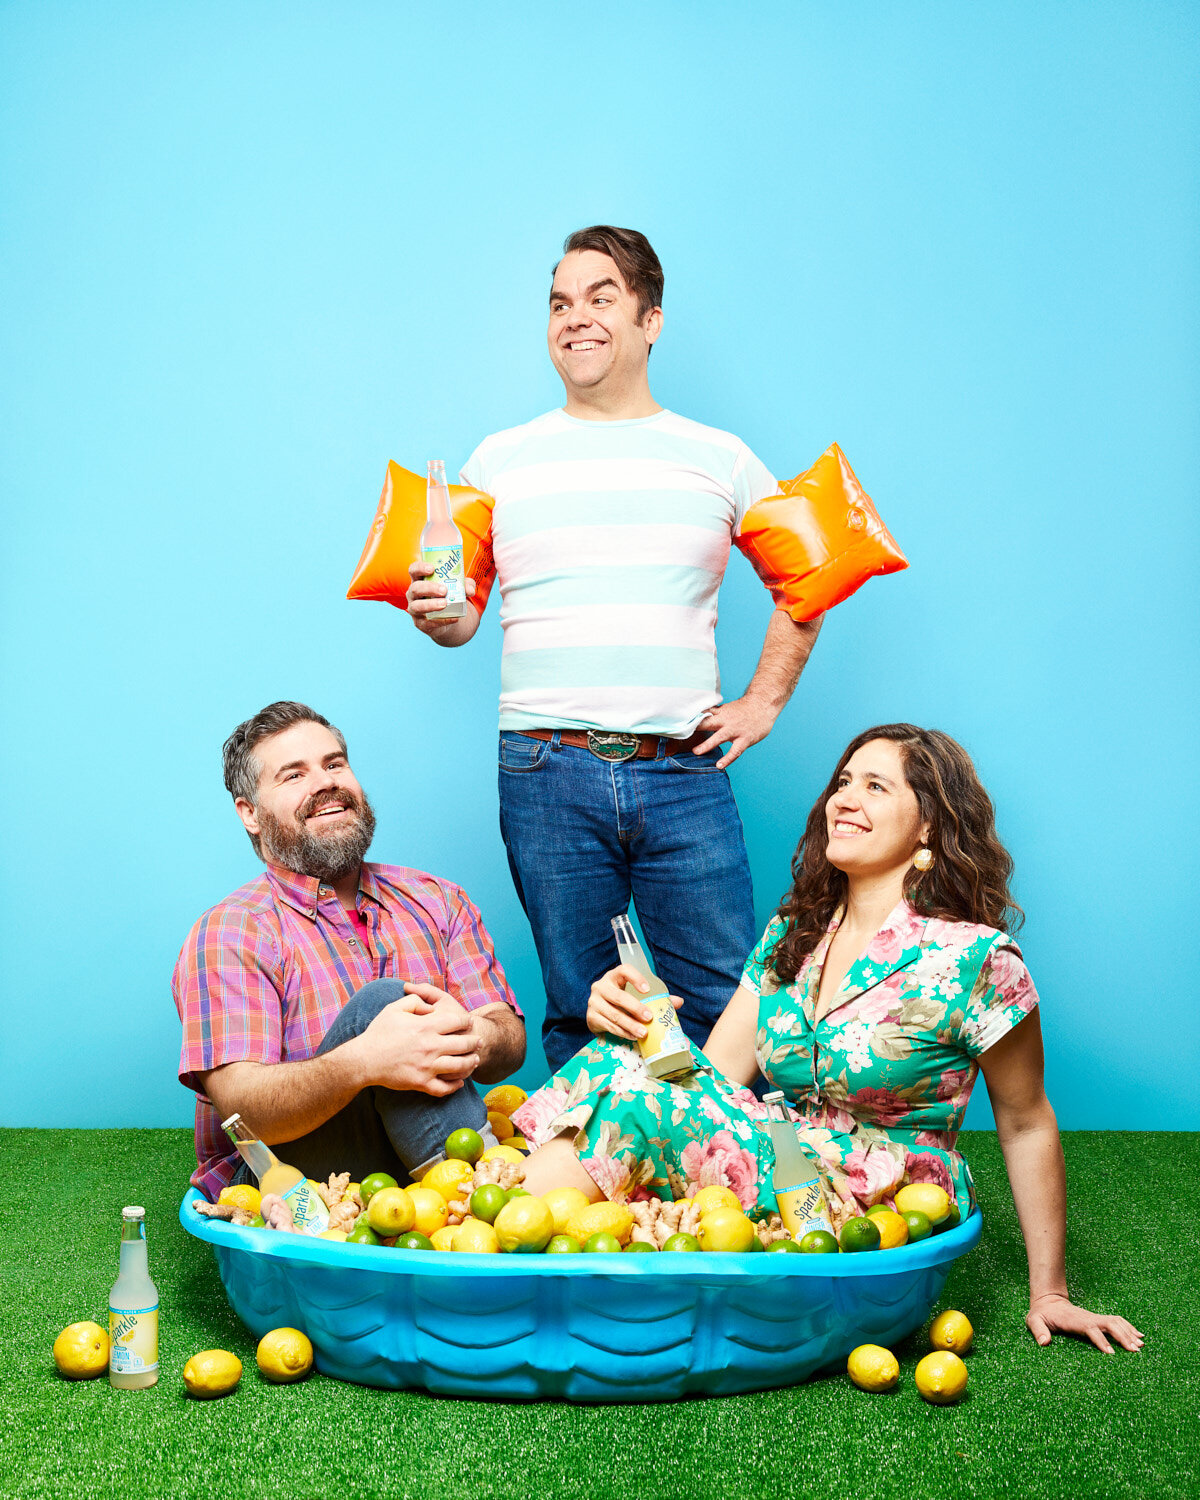 Quirky commercial portrait of the WiscoPop! team sitting in a kiddy pool of produce.